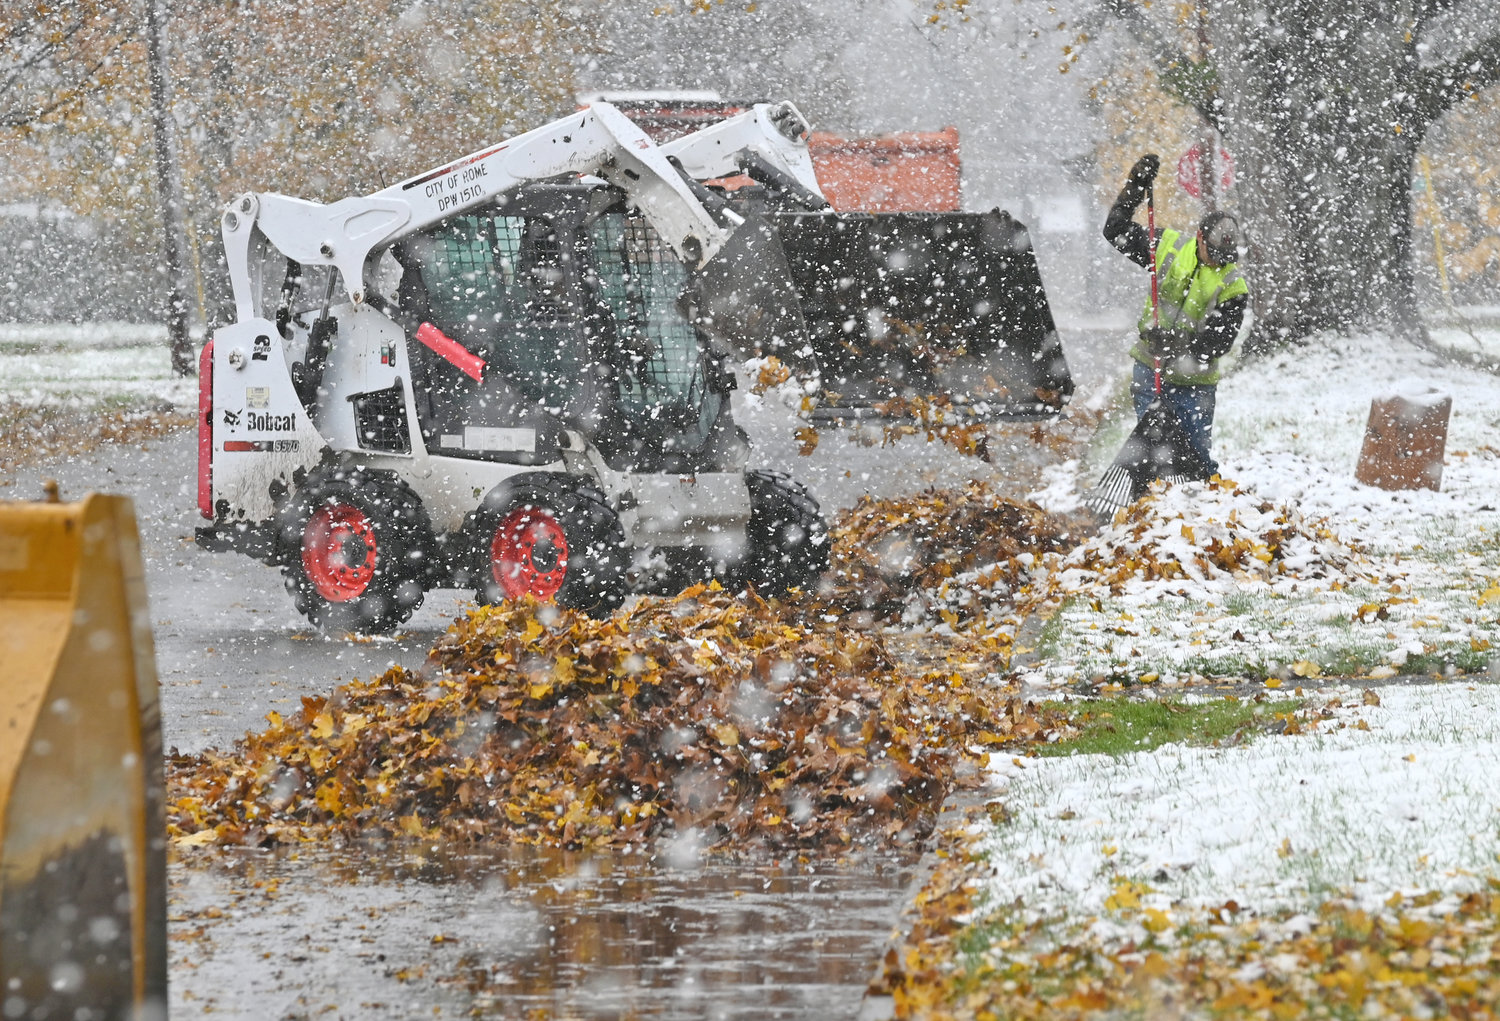 NO STOPPING — Workers with the city’s Department of Public Works stick to their task of picking up leaves amid some falling snow on Friday, Nov. 19, 2021, on Walnut Street.  With the snowfall light in Rome — although it was heavier elsewhere in the county — the department kept going with its annual bulk leaf collection.  If crews are needed for road clearing duties, officials said, they will temporarily halt leaf pickup to make sure roads are passable. Check out the gallery in the photo gallery section of the home page.